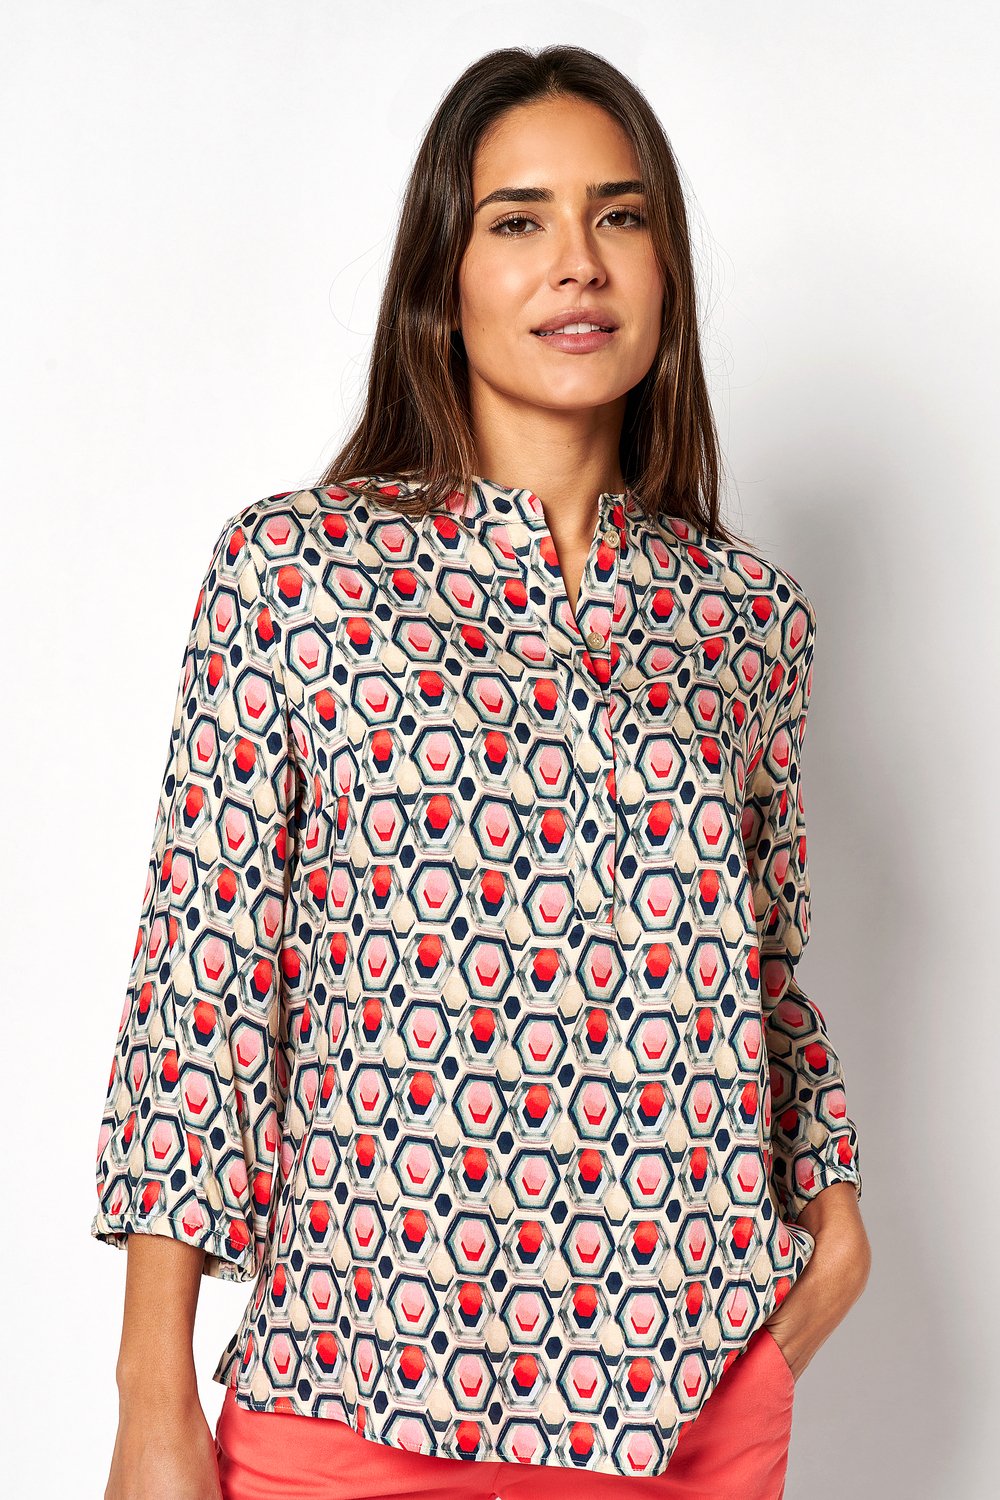 Pull-on blouse with retro print | Style »Alis« multicolour red